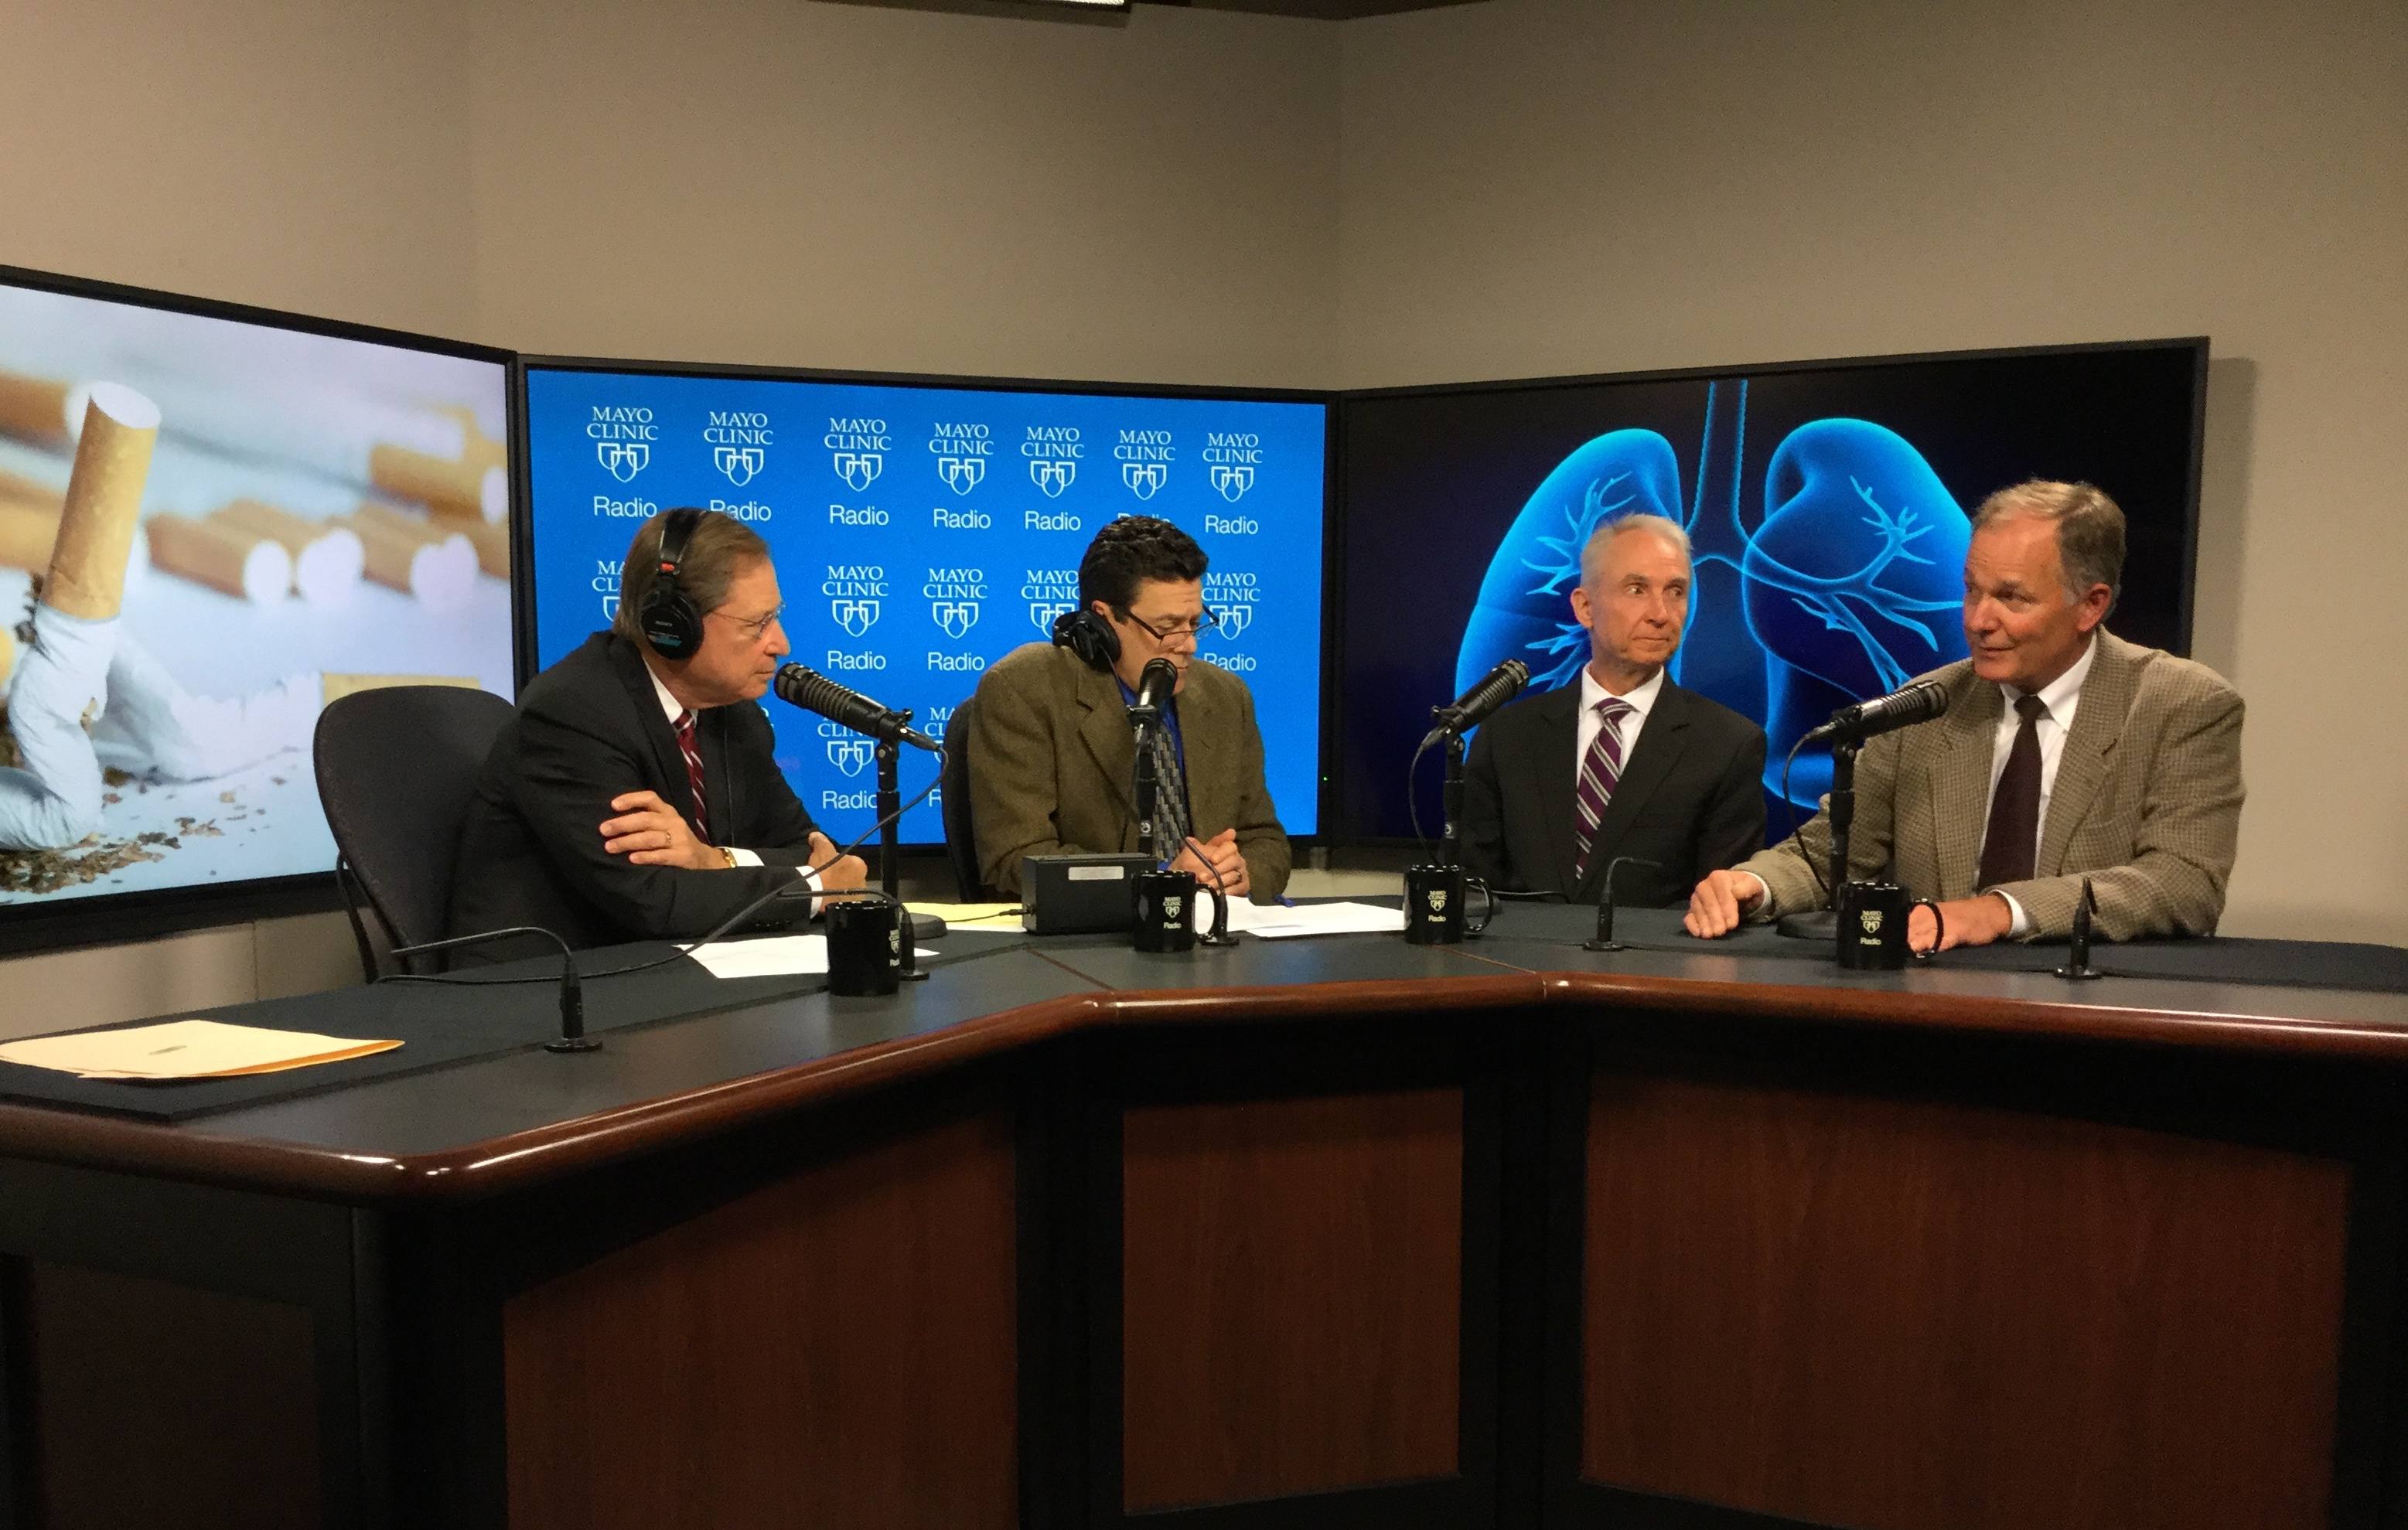 Dr. David Midthun and Dr. J. Taylor Hays being interviewed on Mayo Clinic Radio